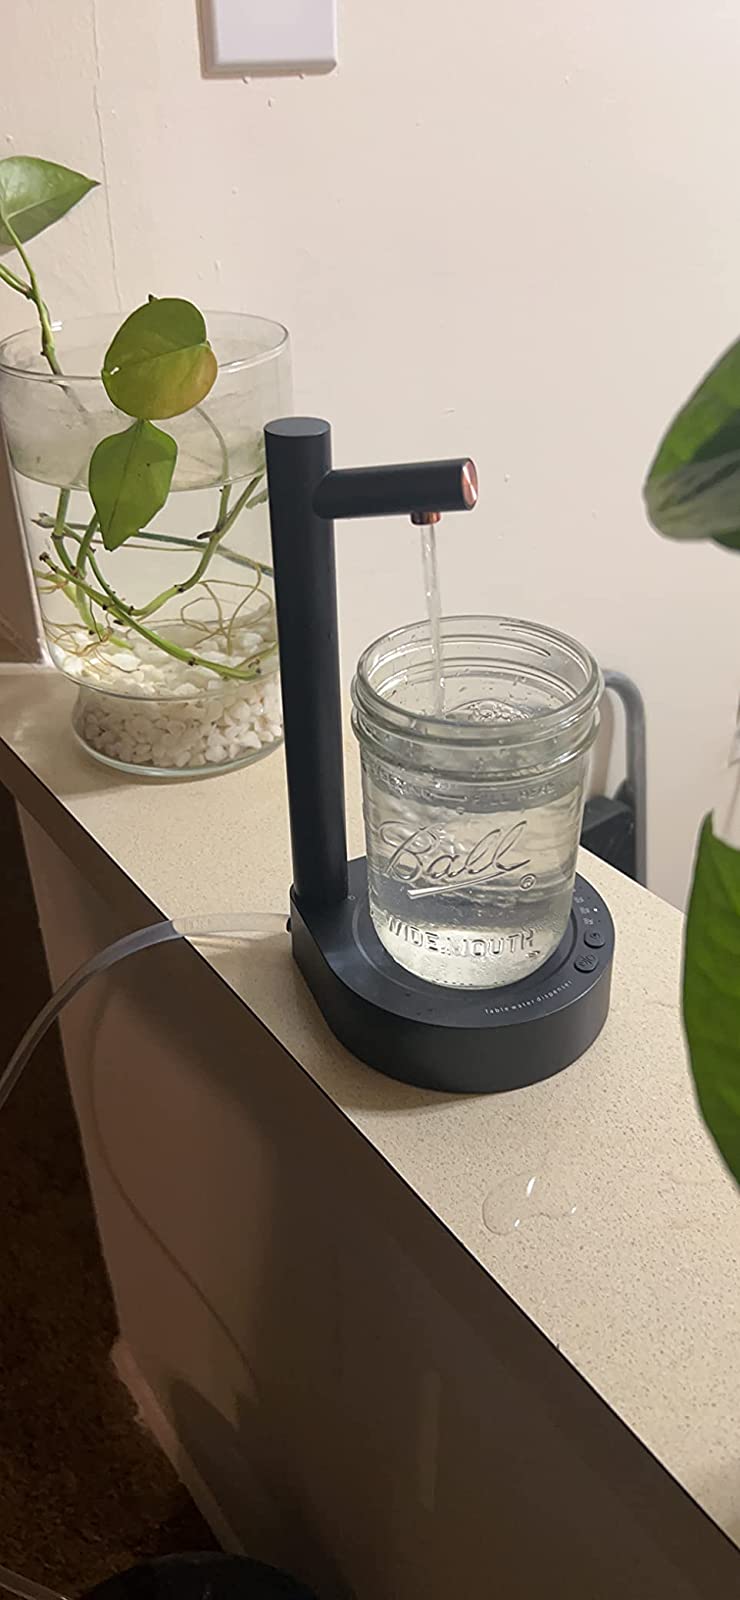 Rechargeable Automatic Water Bottle Pump with Stand photo review